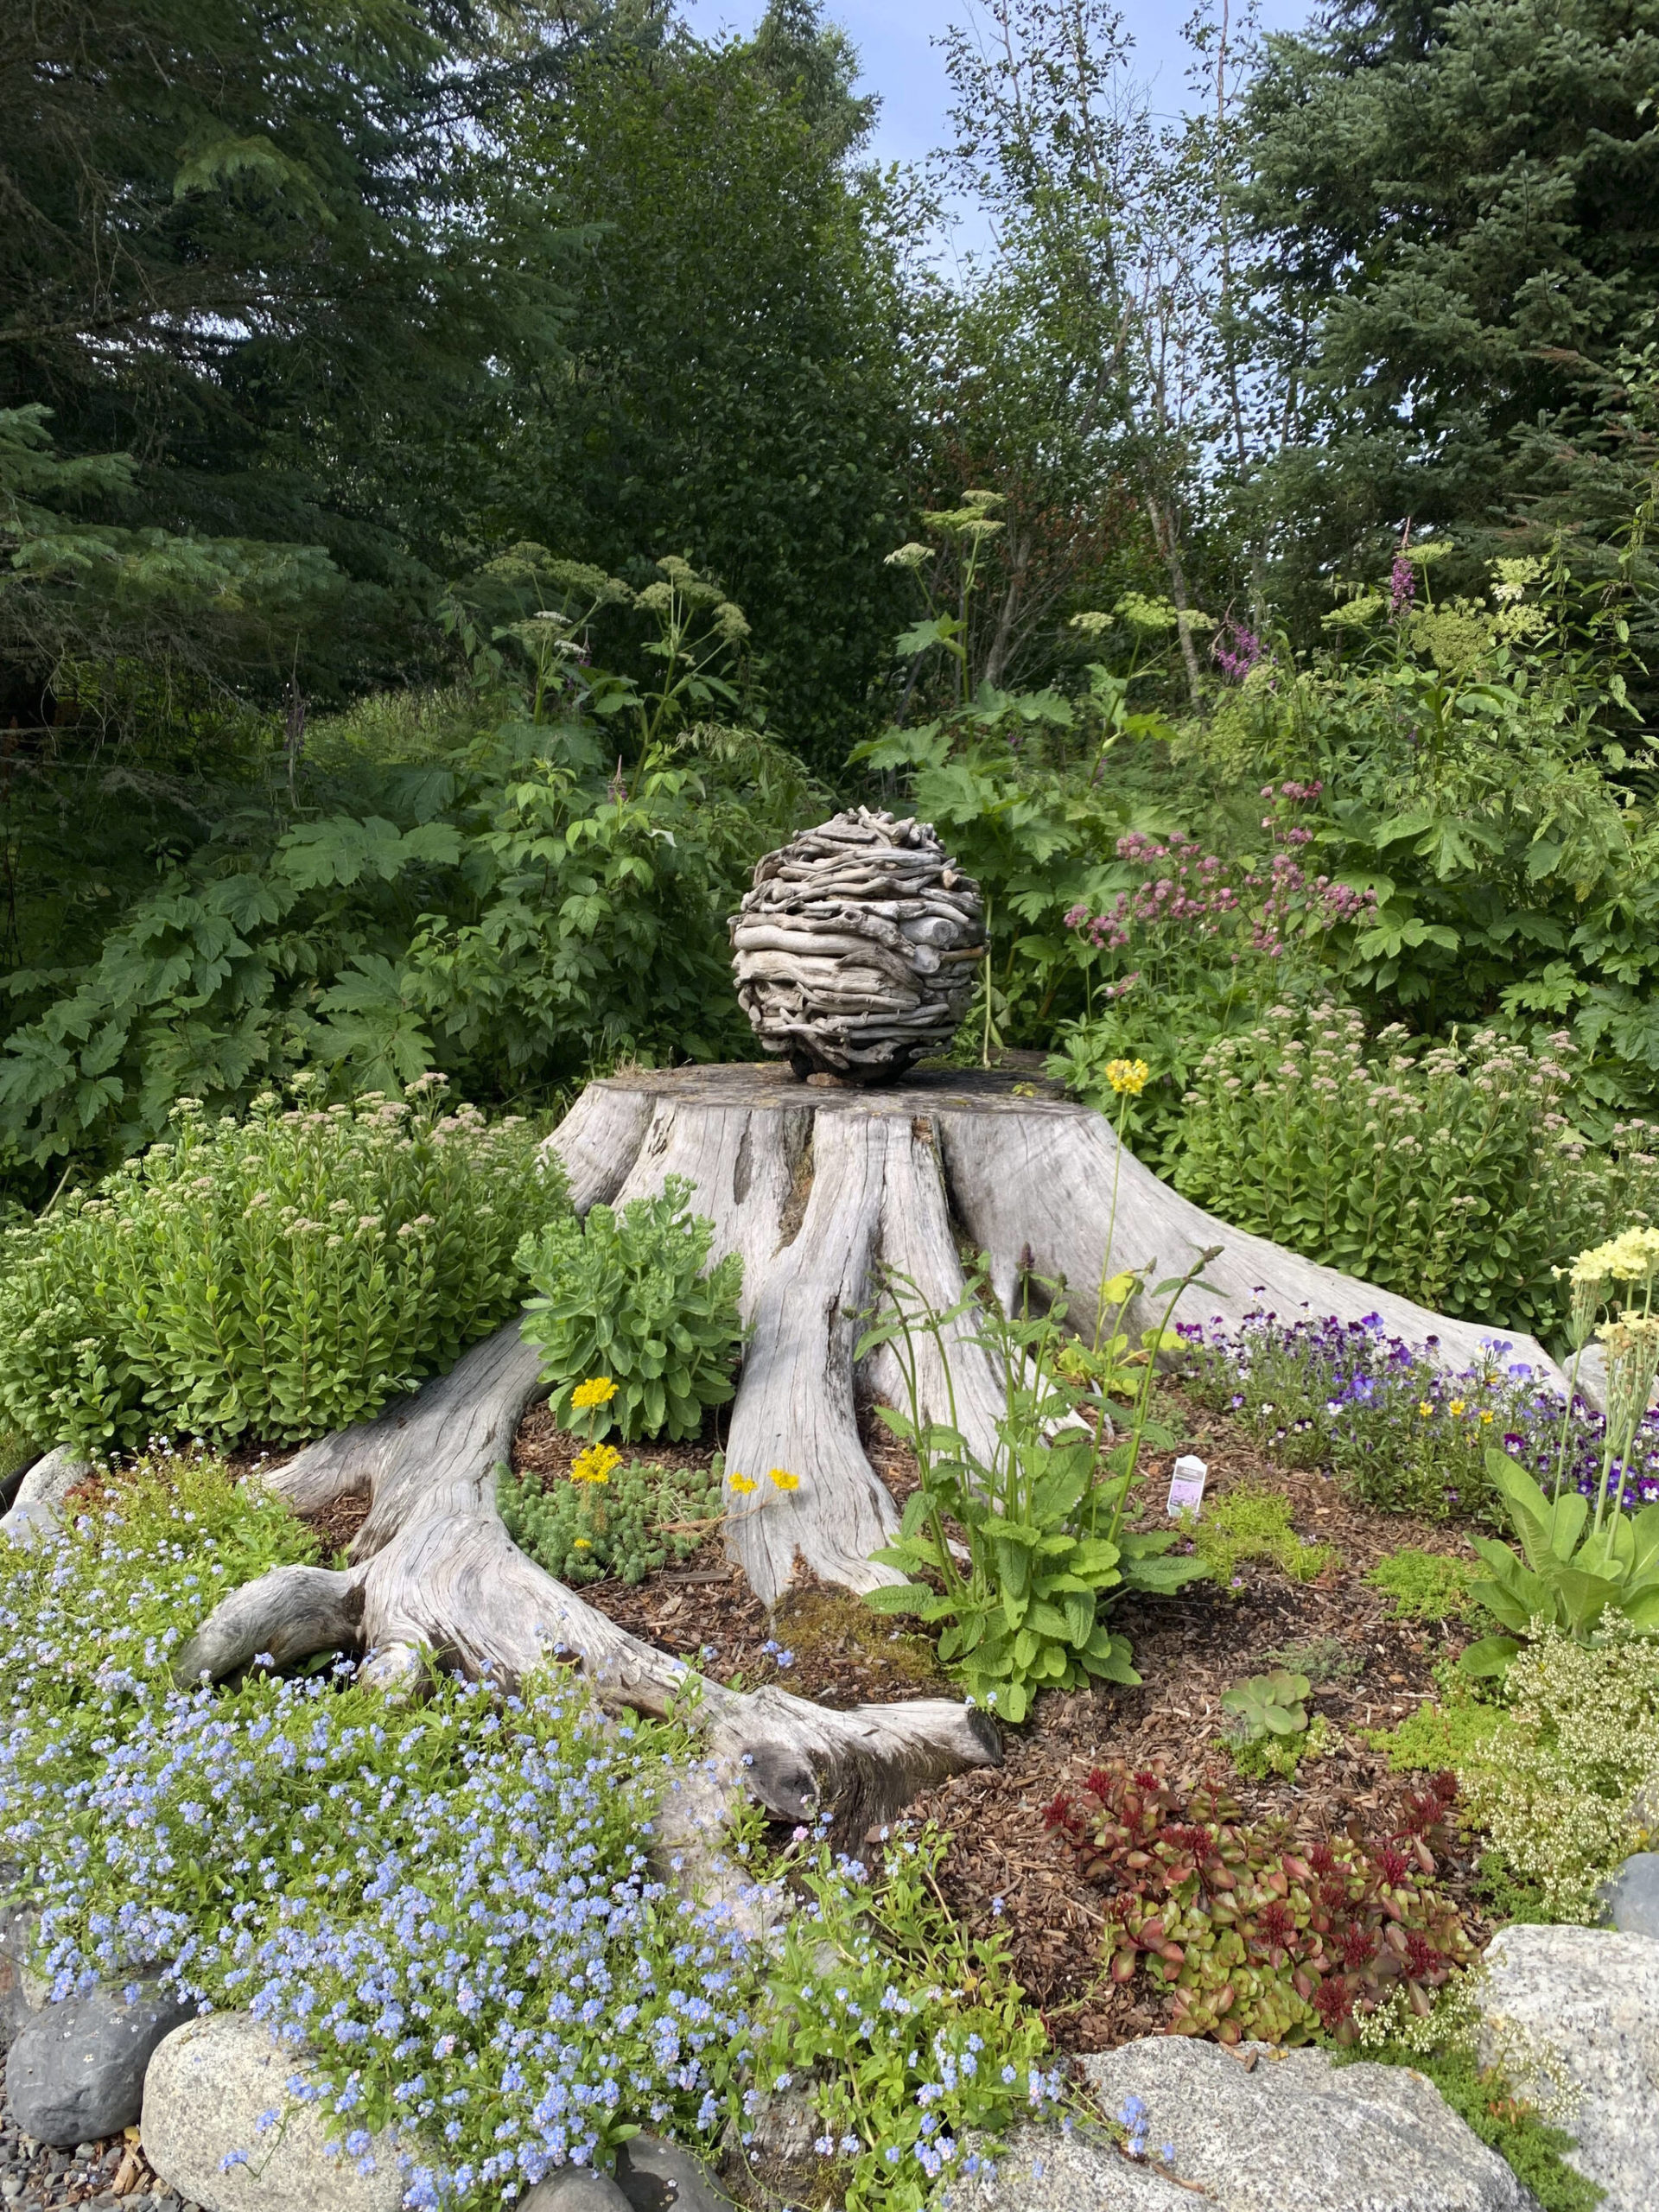 A garden at the home of Ralph Broshes and Deb Lowney features one of Lowney’s sculptures. It was part of the walking tour portion of the Homer Garden Tour on Sunday, July 17, in Homer, Alaska. (Photo by Charlie Menke/Homer News)